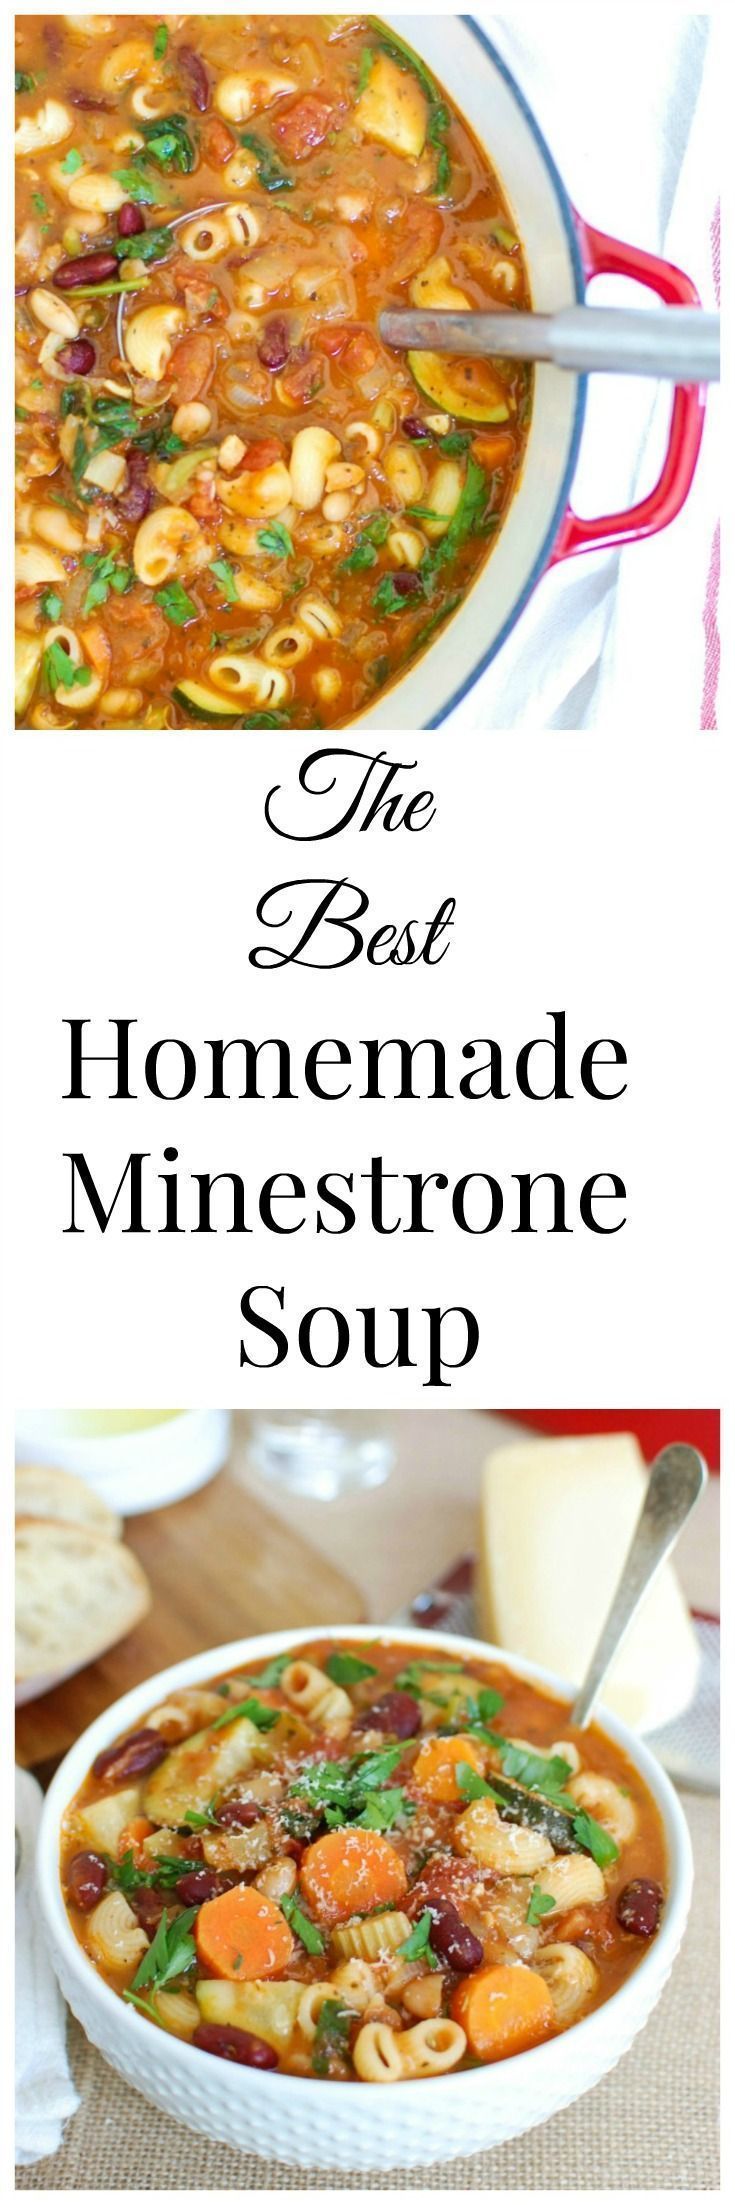 This Homemade Minestrone Soup Recipe is a tomato base hearty soup that is packed with vegetables and beans. If you love a